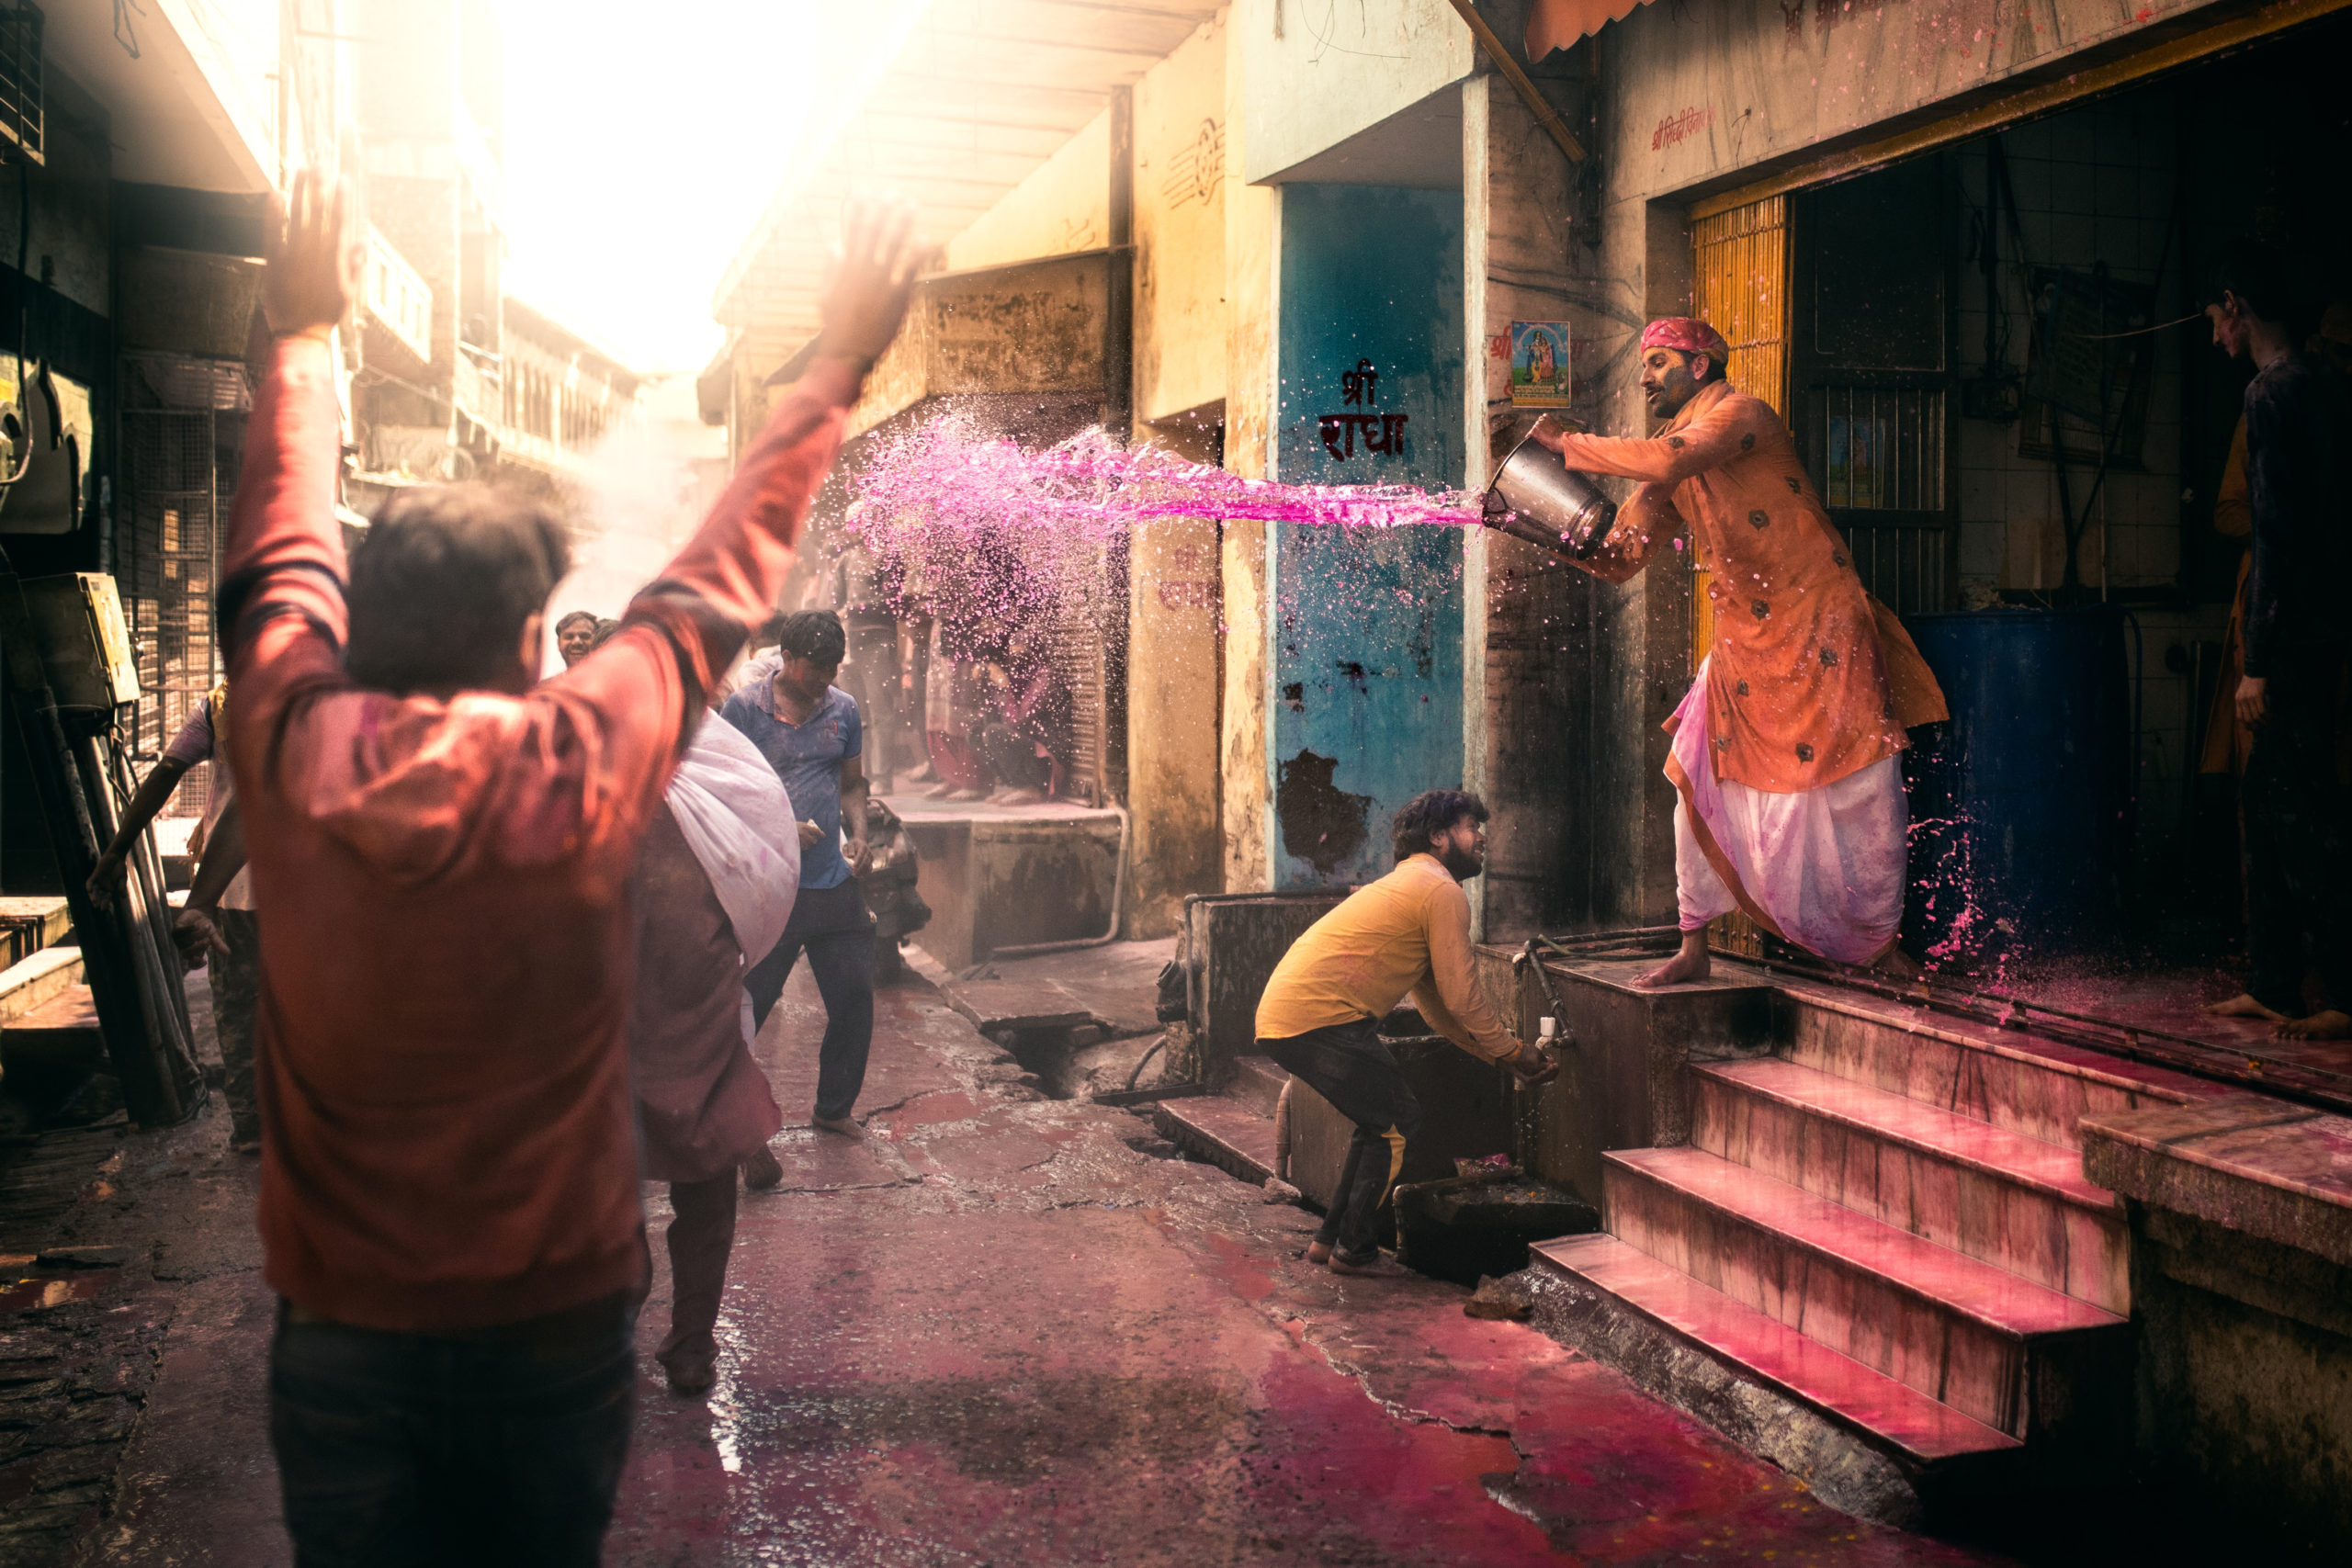 Street photography of a man throwing a bucket of water at someone in the streets during the Holi Festival in Vrindavan, India